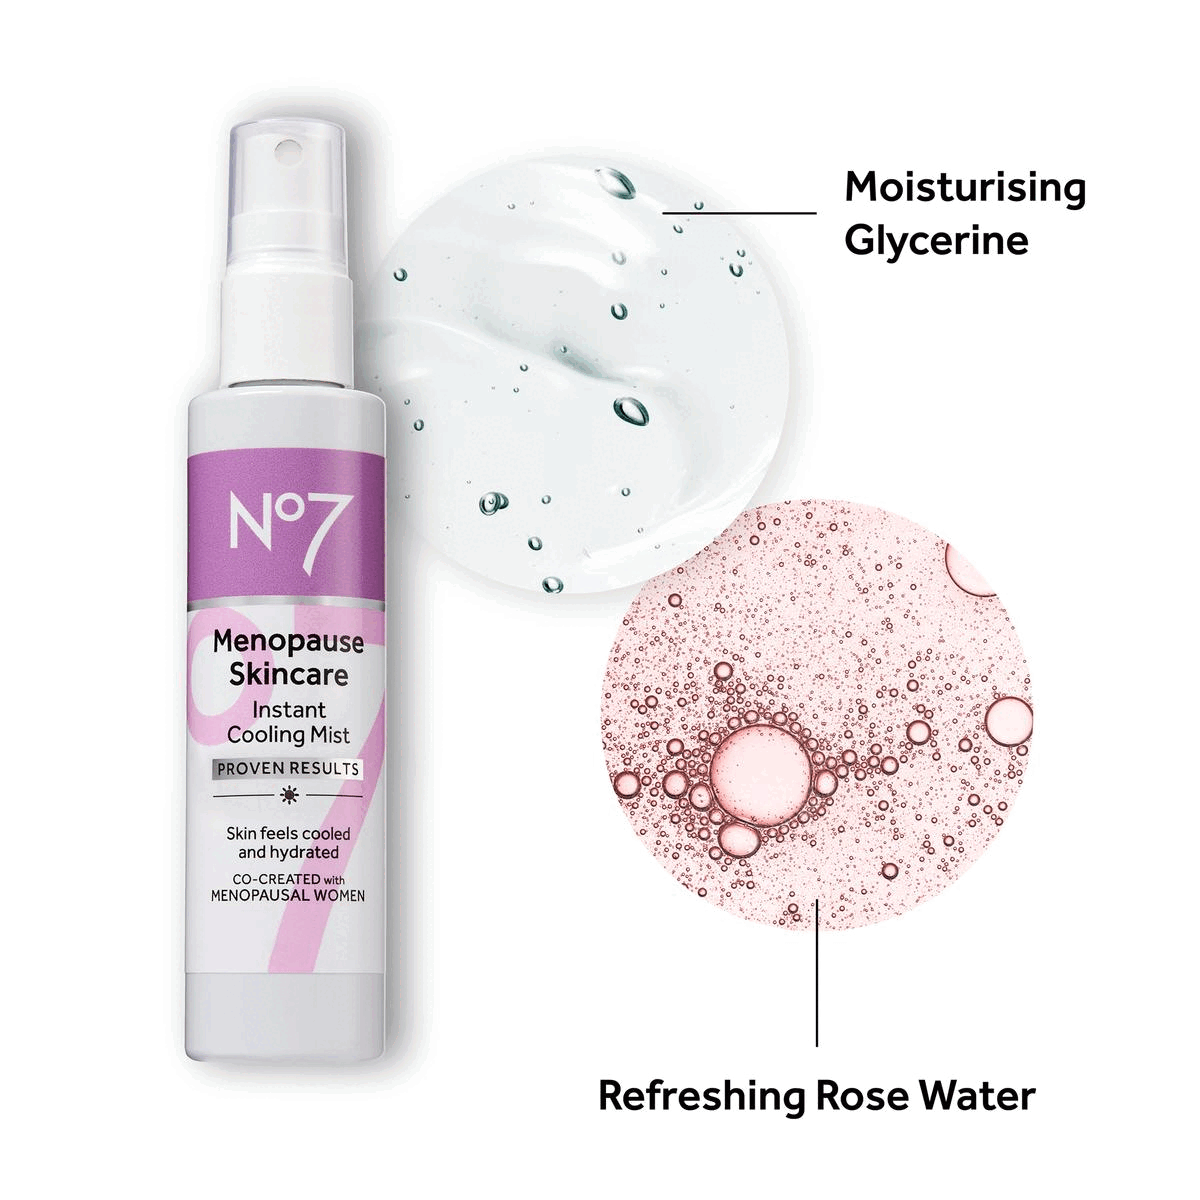 Mist, Moisturising glycerine and refreshing rose water.
              Brings cool and calm to hot, flushed skin* Consumer study